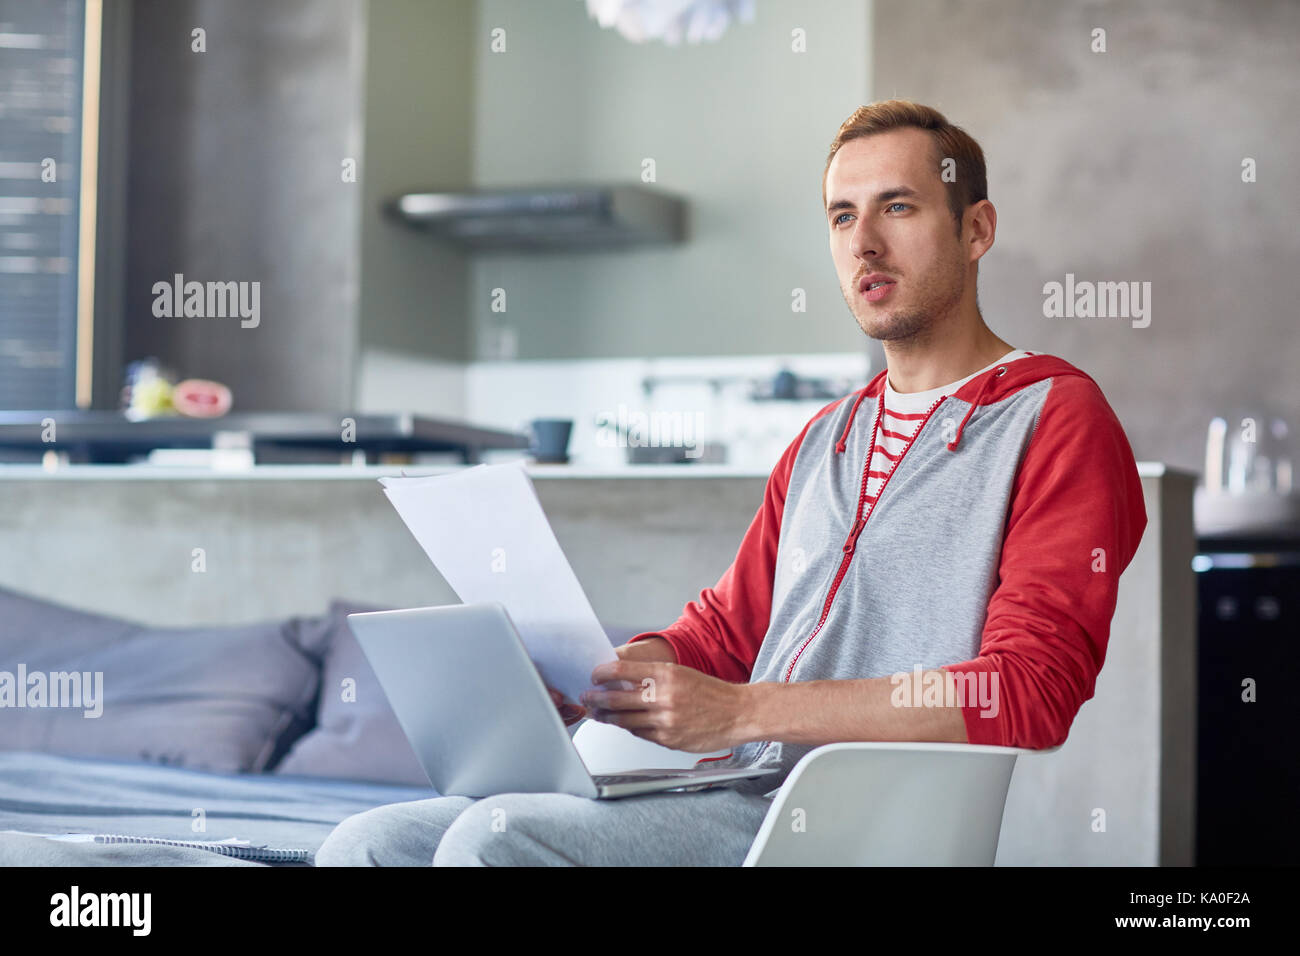 Thinking over Promising Project Stock Photo